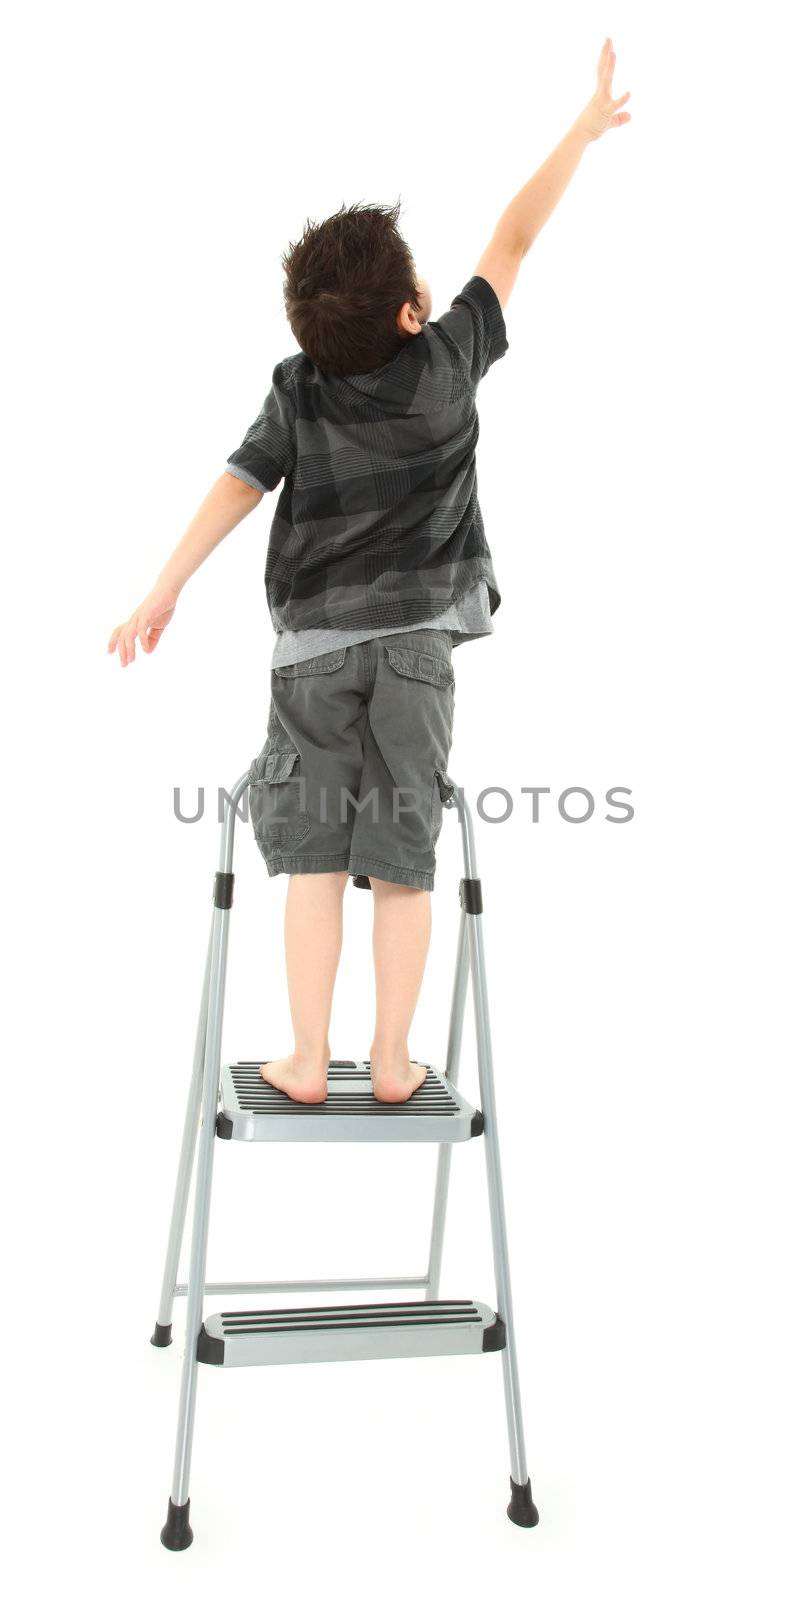 Young boy on step ladder reaching up over white background.